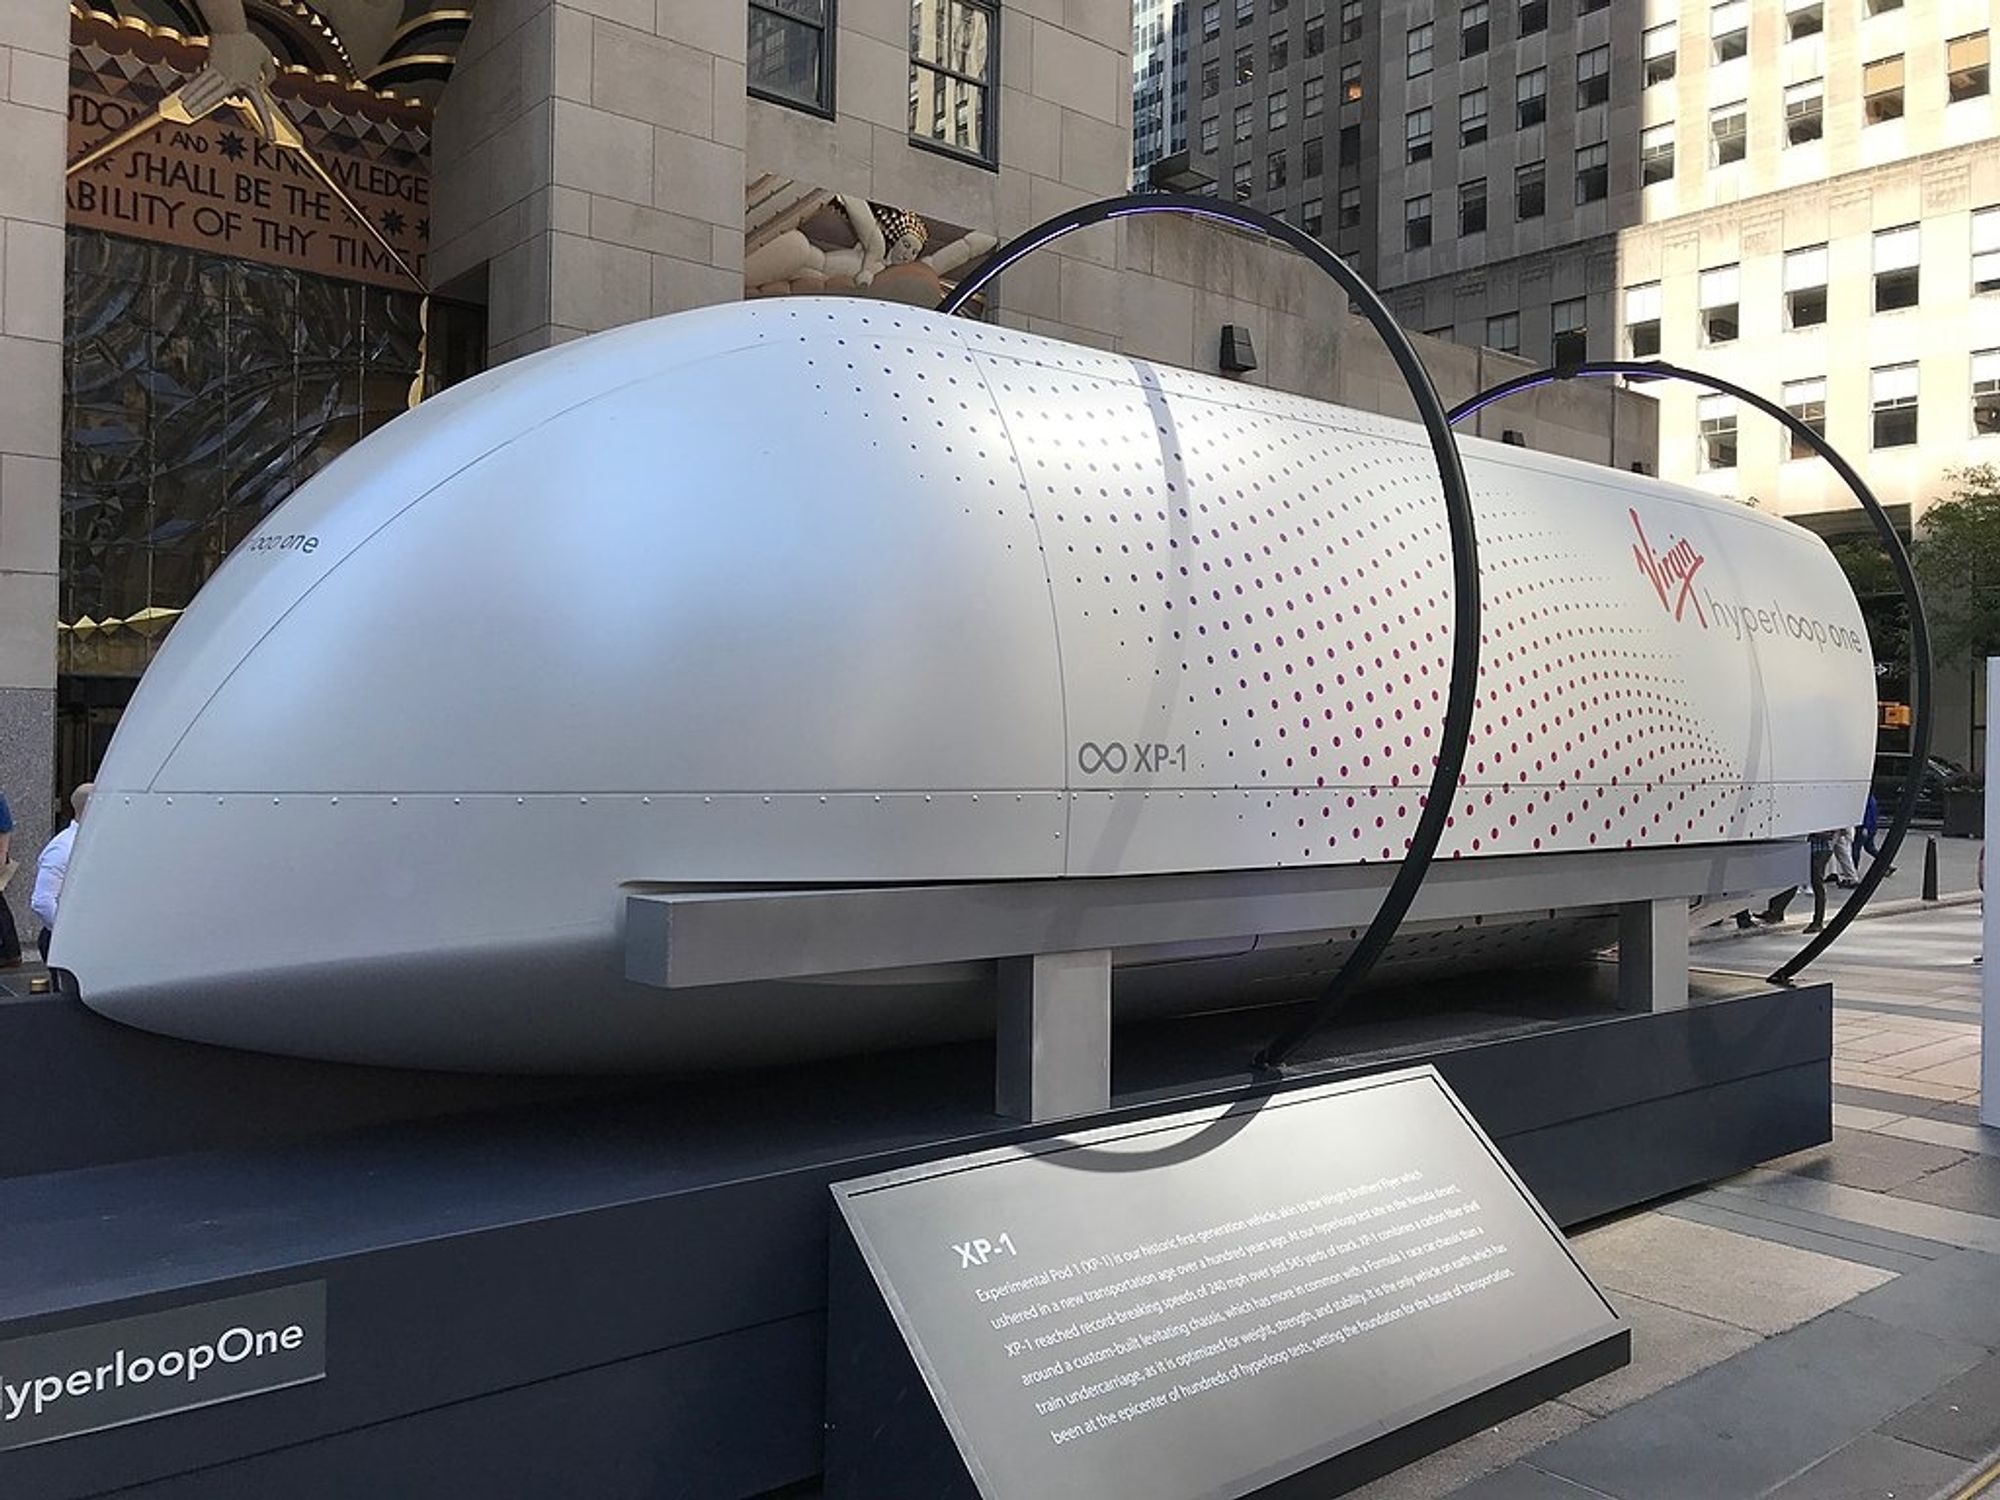 City-to-City Stops in Under an Hour? Hyperloop Technology Just Took a Step Further in the US